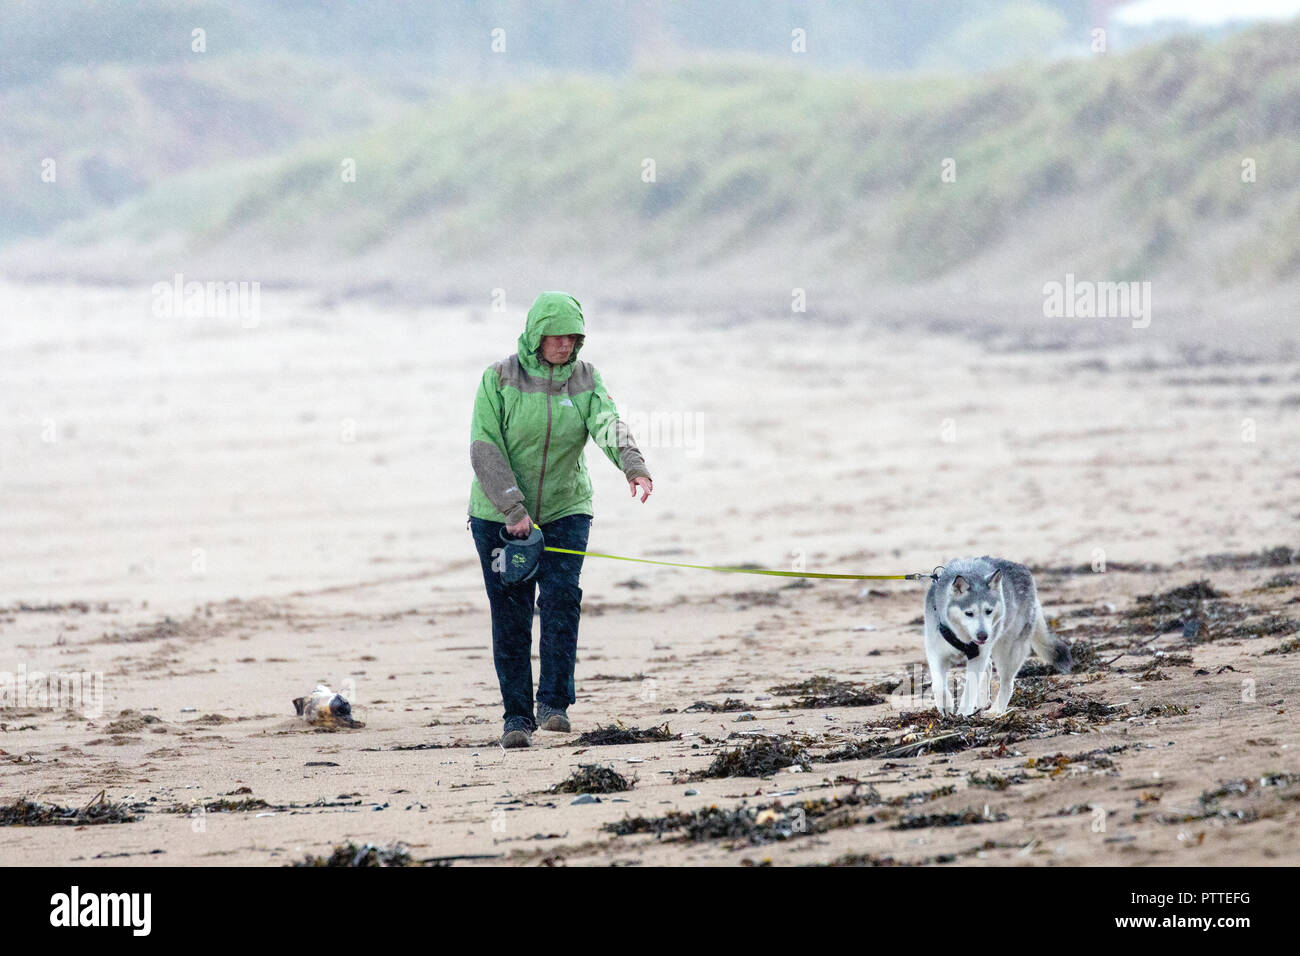 Freshwater East, Pembrokeshire, Wales, 11h October 2018. UK Weather: Wet stormy weather begins to make for heavy seas with Storm Callum making for a stormy weekend ahead.  Pembrokeshire, Wales. A lone dog walker with her her husky braving the wet and windy weather on the shoreline at Freshwater East, Pembrokeshire Â©DGDImages/AlamyNews Stock Photo